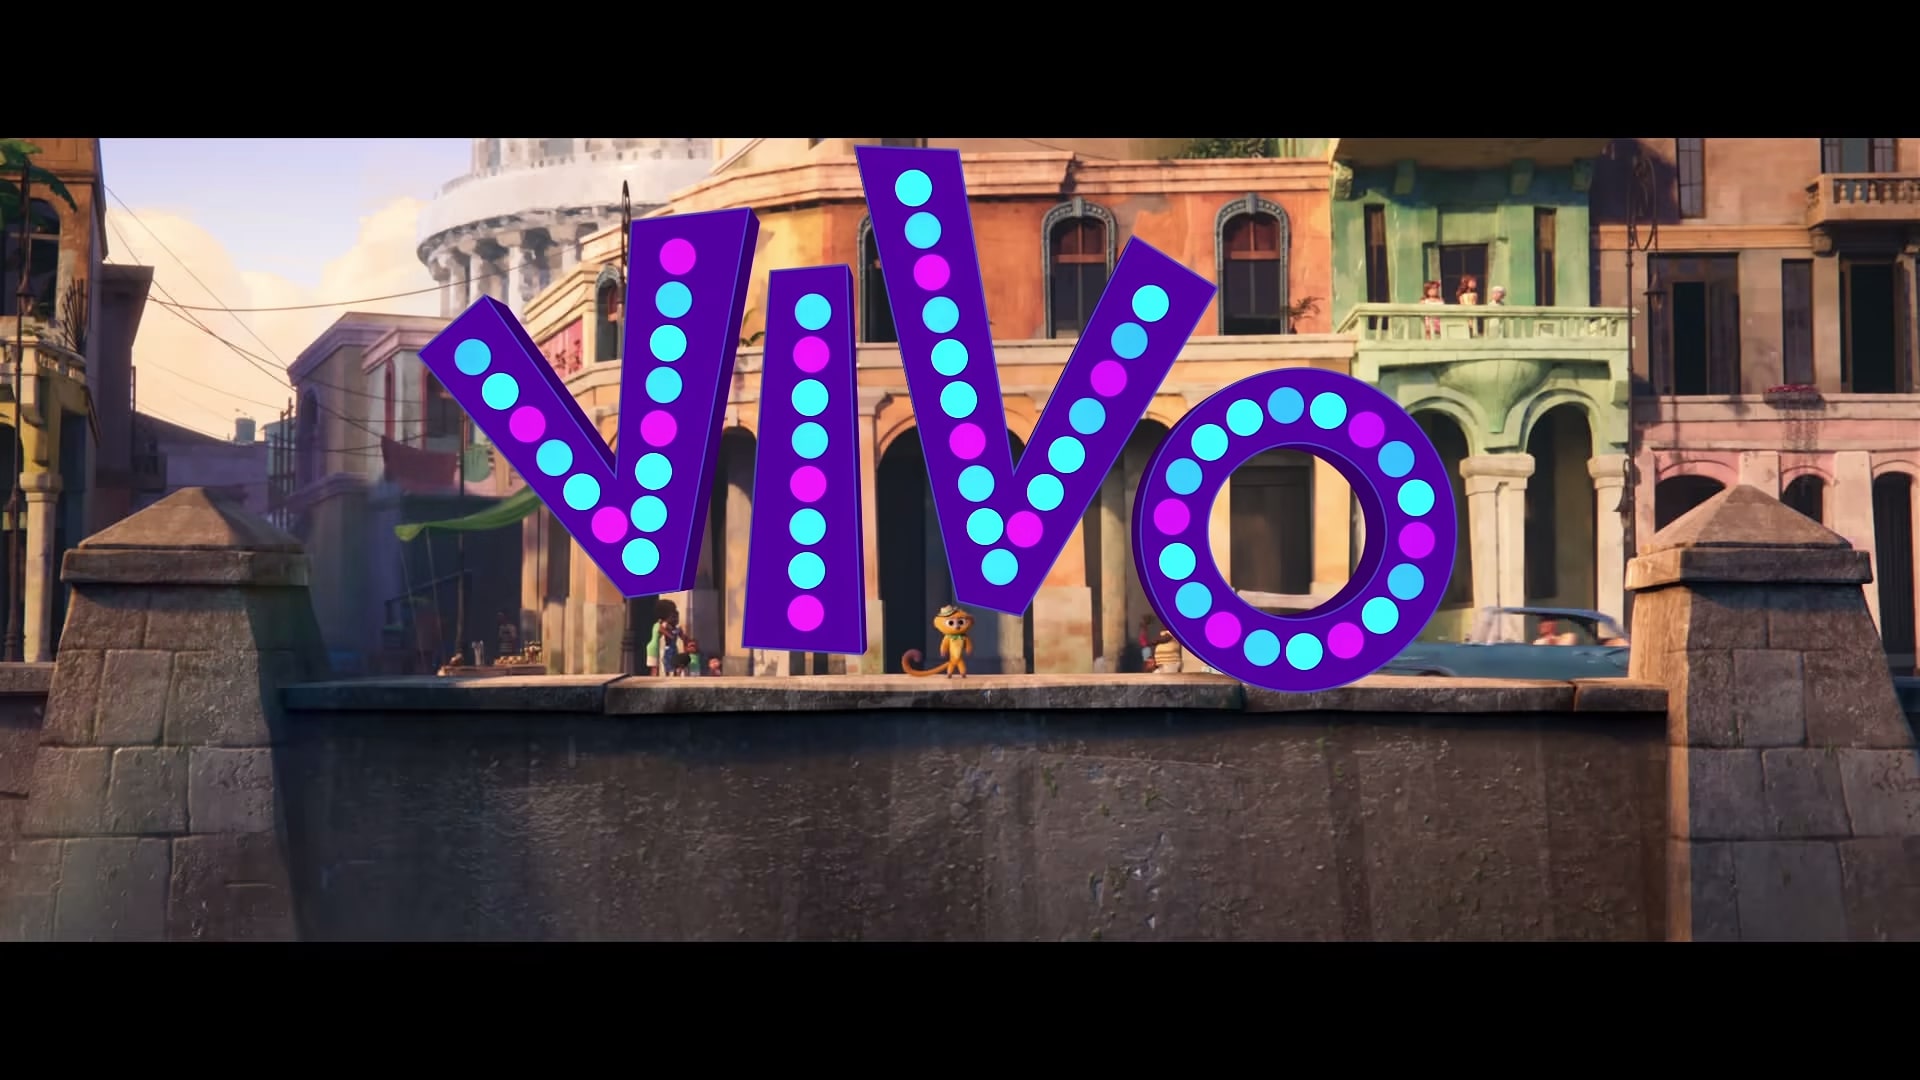 Netflix Vivo Official Trailer, Coming to Netflix in August 2021